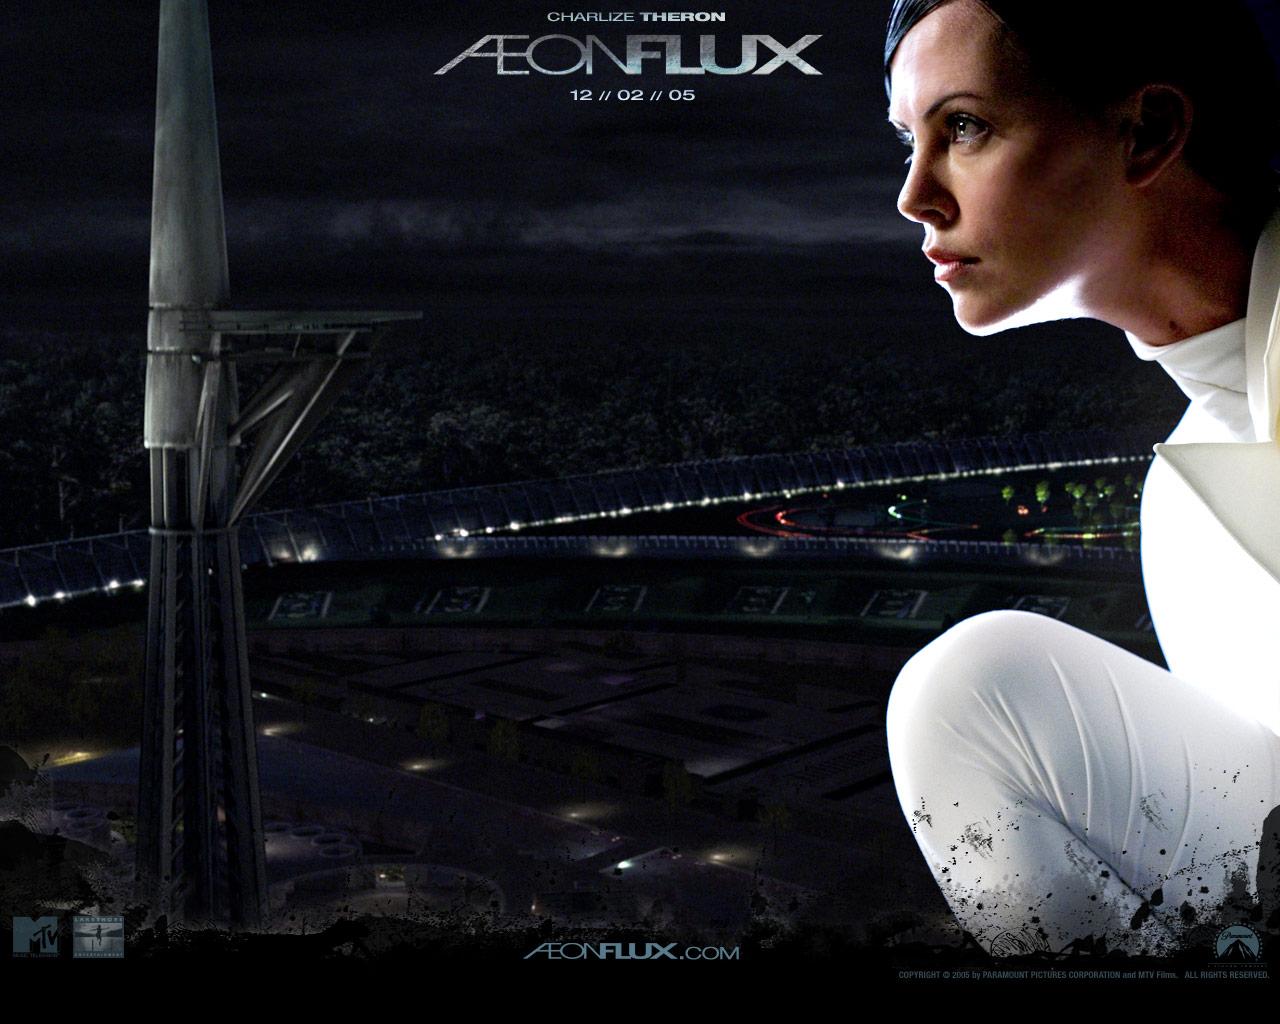 Charlize Theron Theron in 2005 Aeon Flux Wallpaper 4 800x600